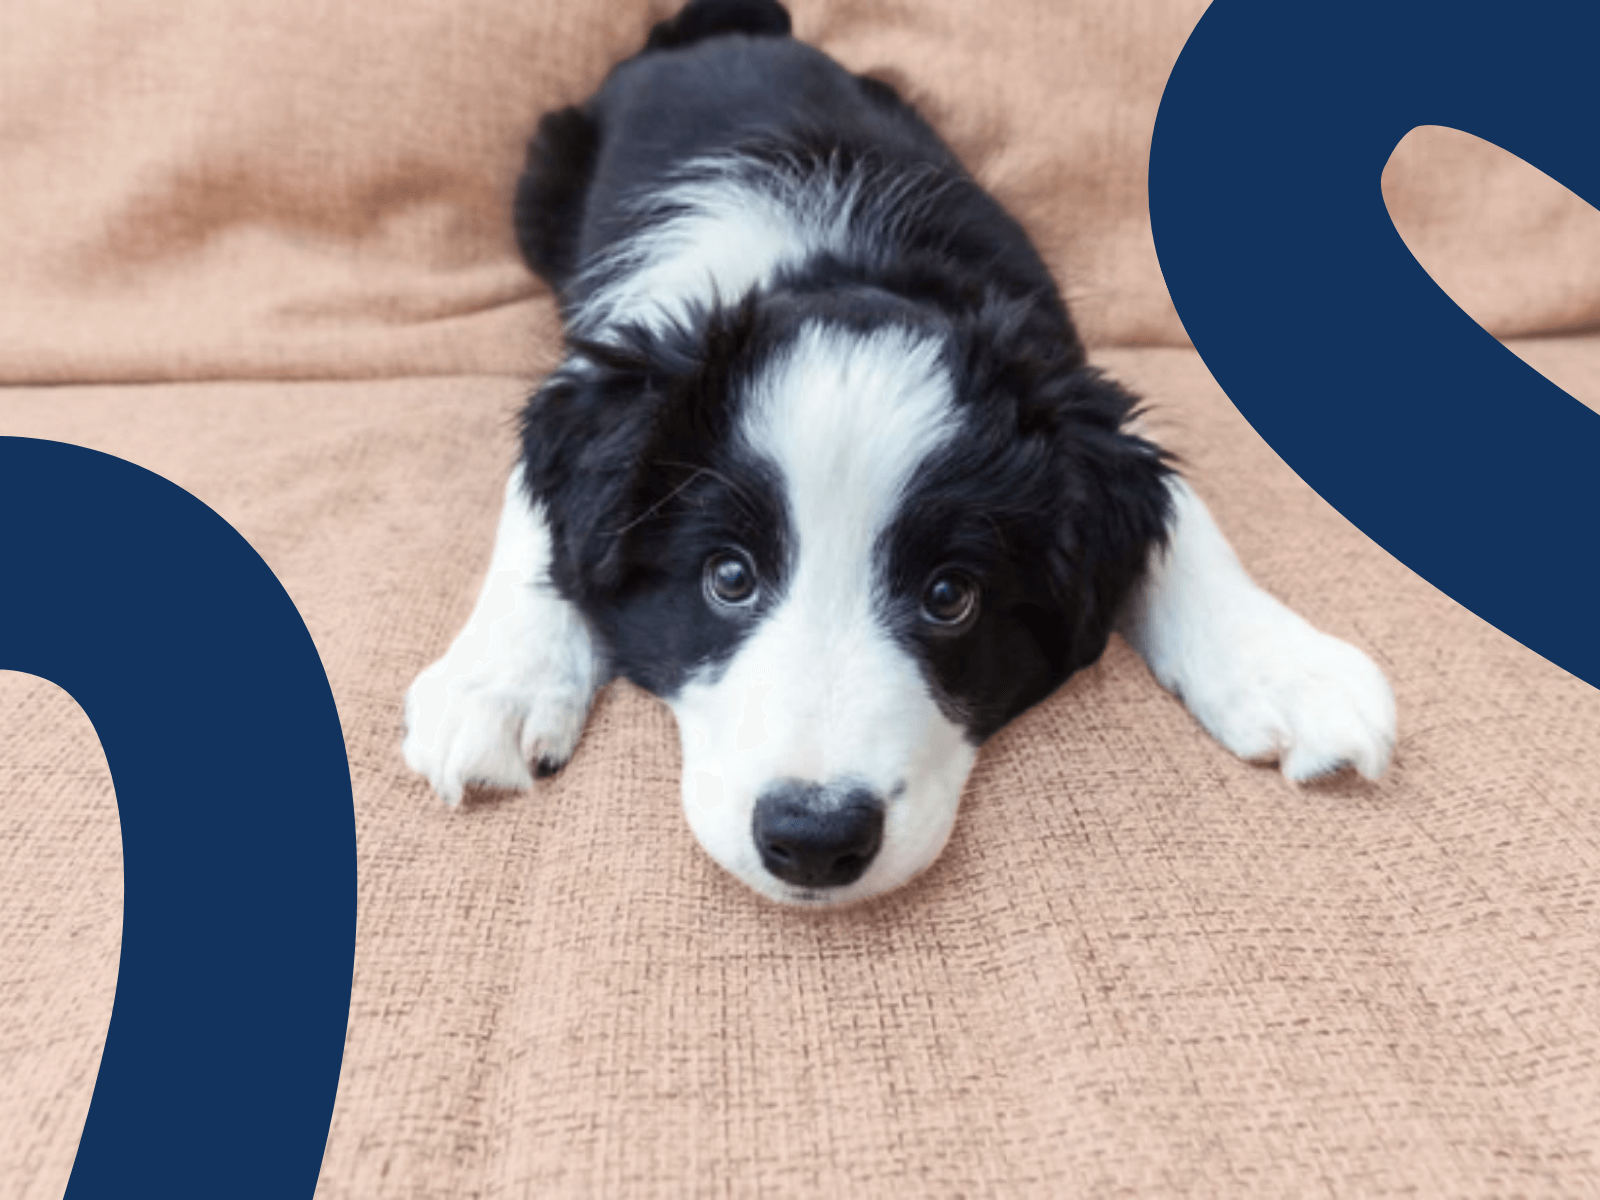 Training Tips For Your Border Collie Puppy